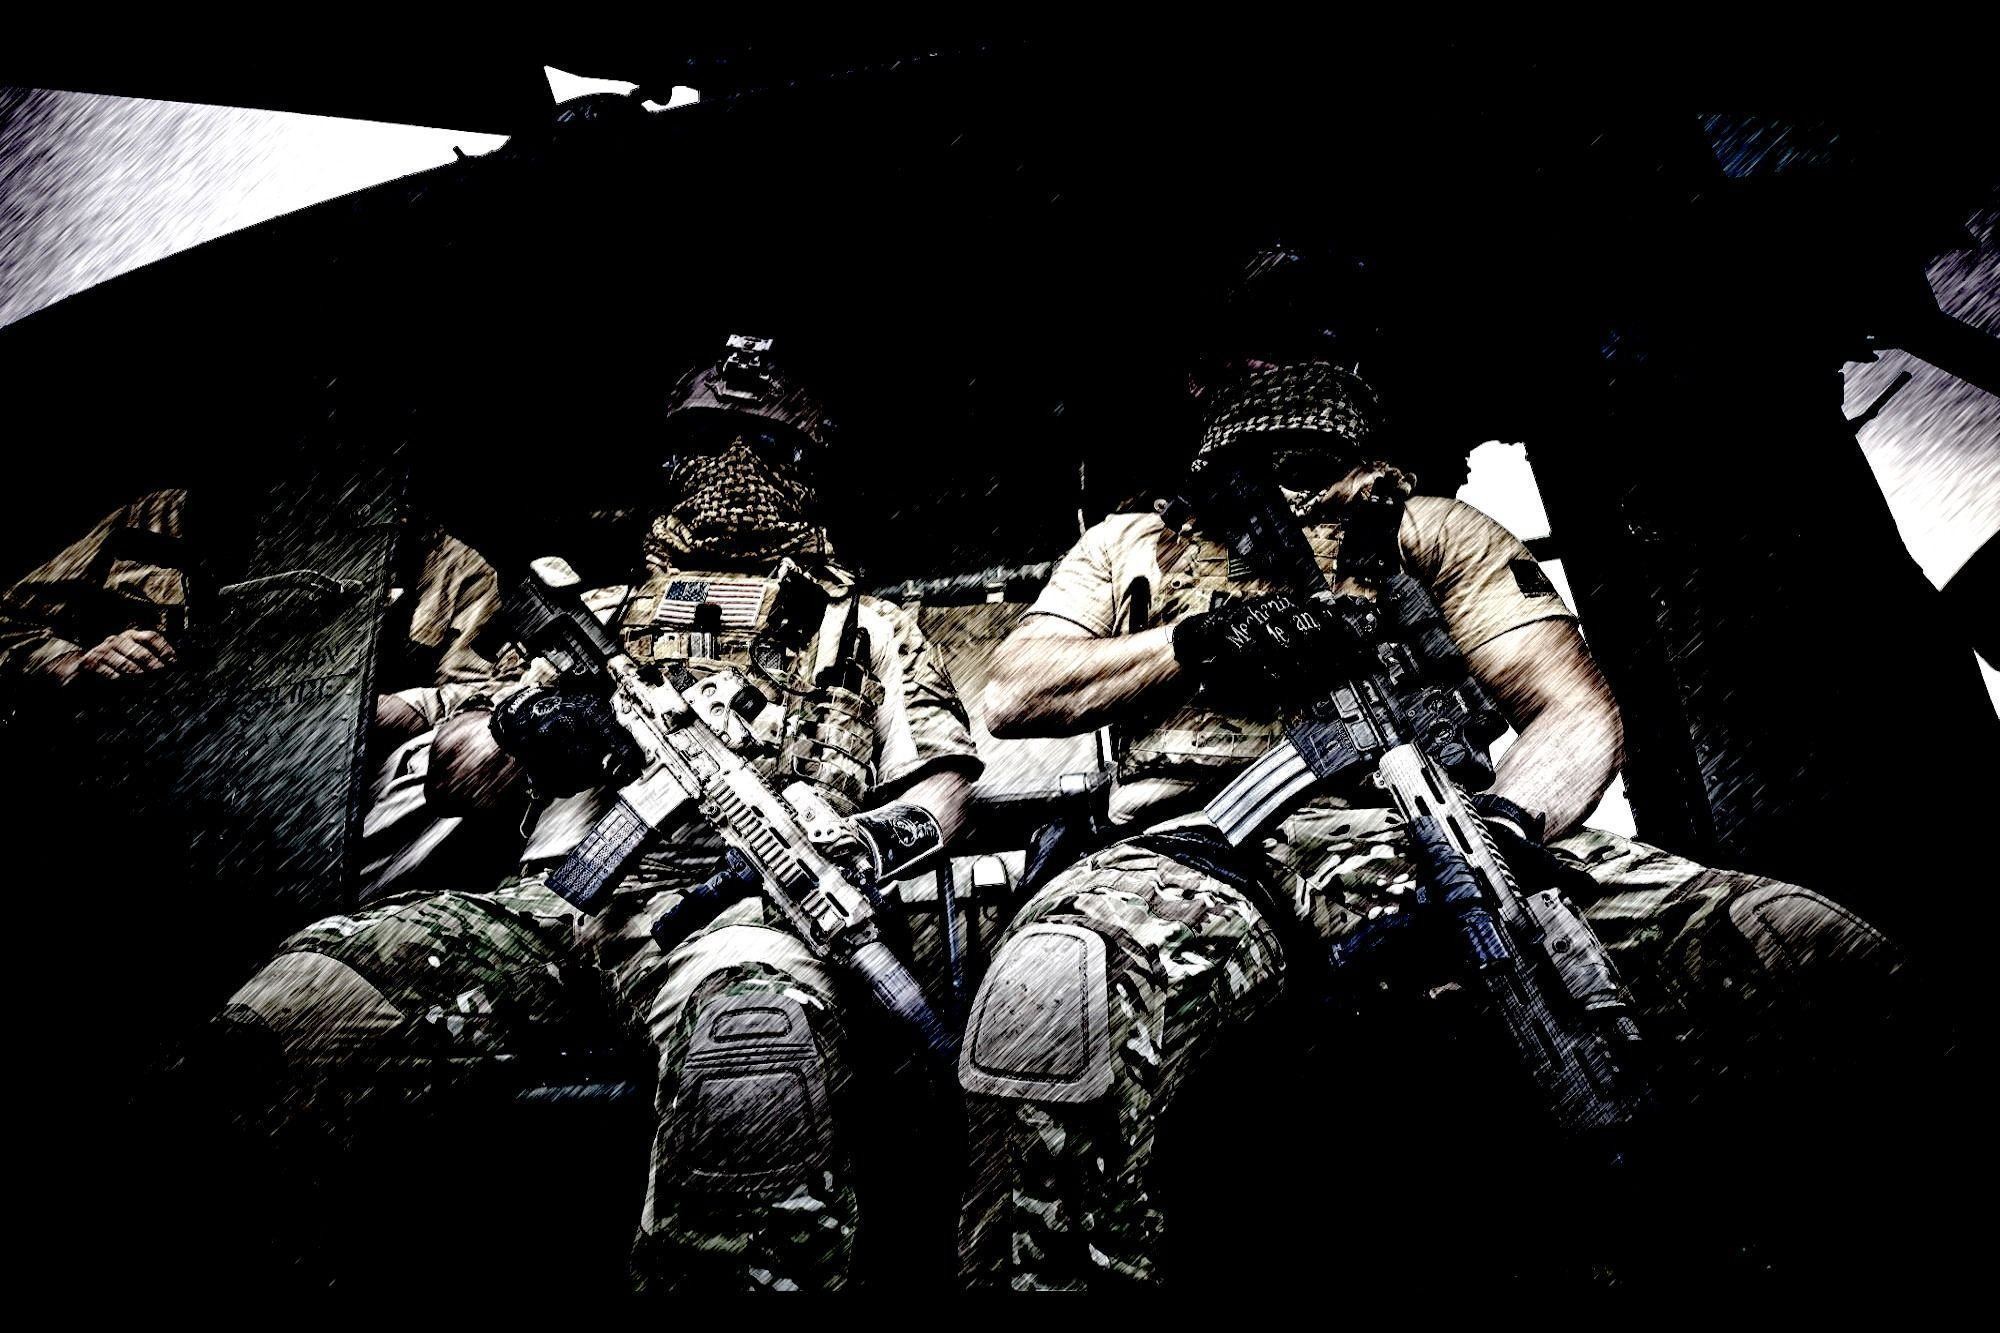 2000x1333 Special forces wallpapers backgrounds wallpaper abyss jpg  Special  ops wallpaper black